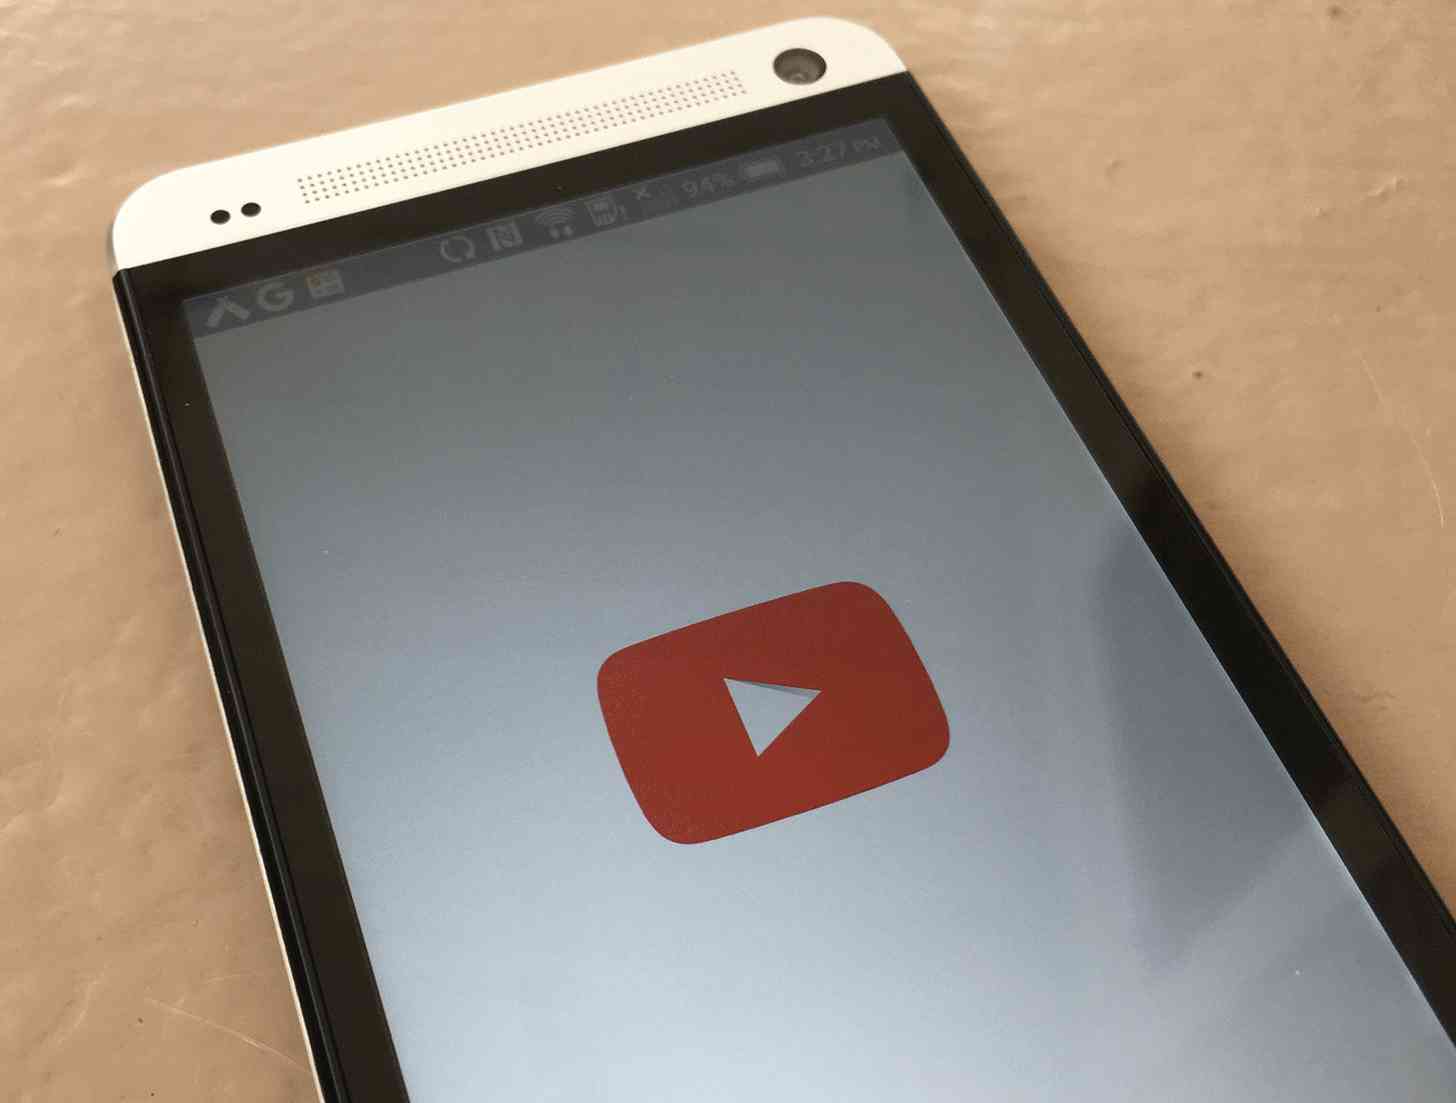 YouTube app for Android